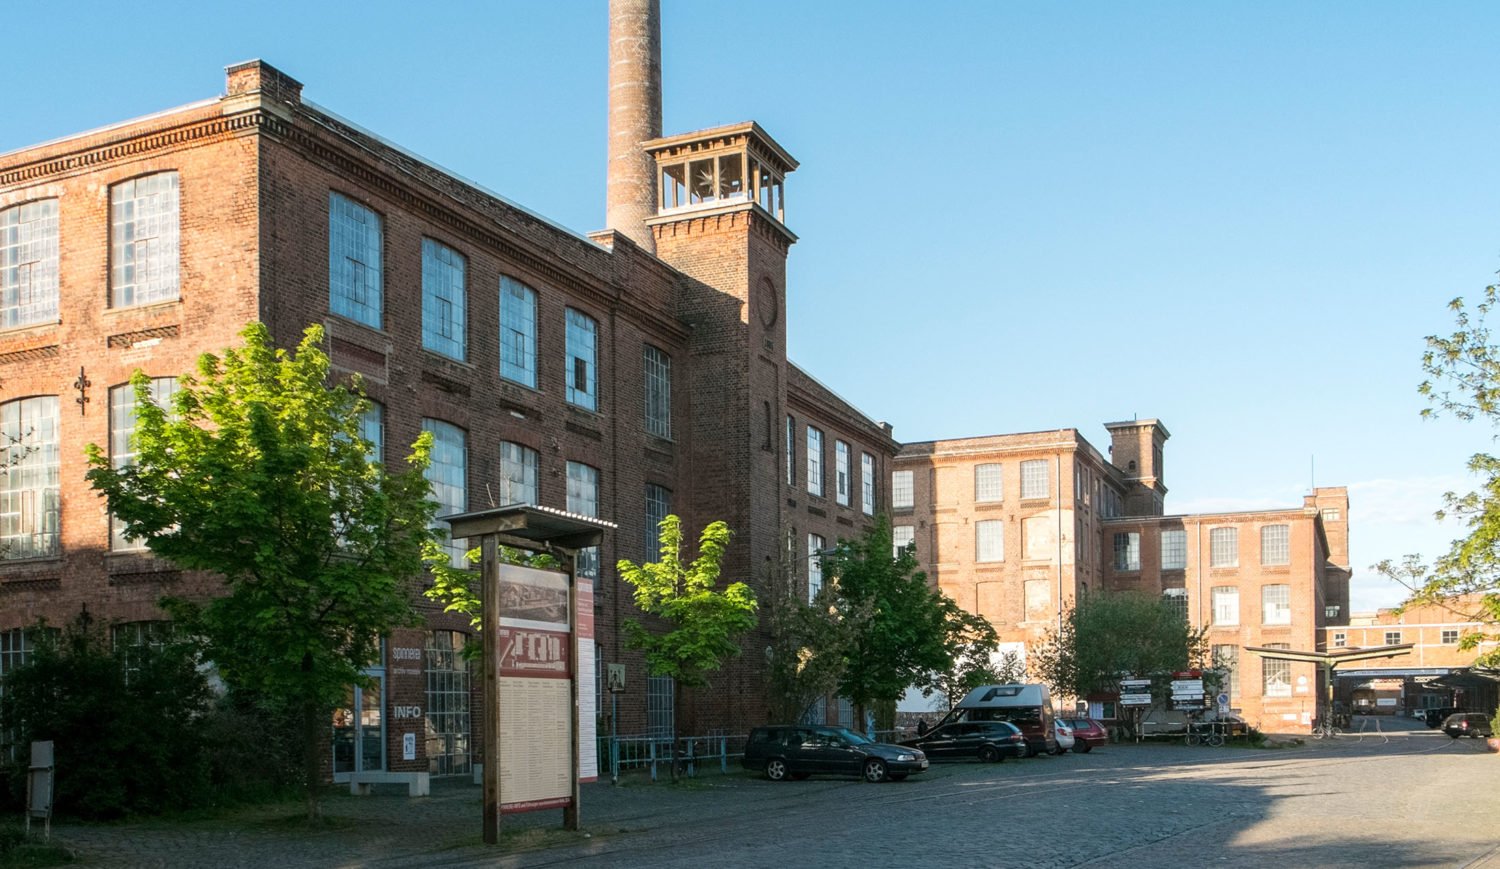 On the former industrial site of the Old Spinning Mill there are numerous workshops, stores and exhibition rooms